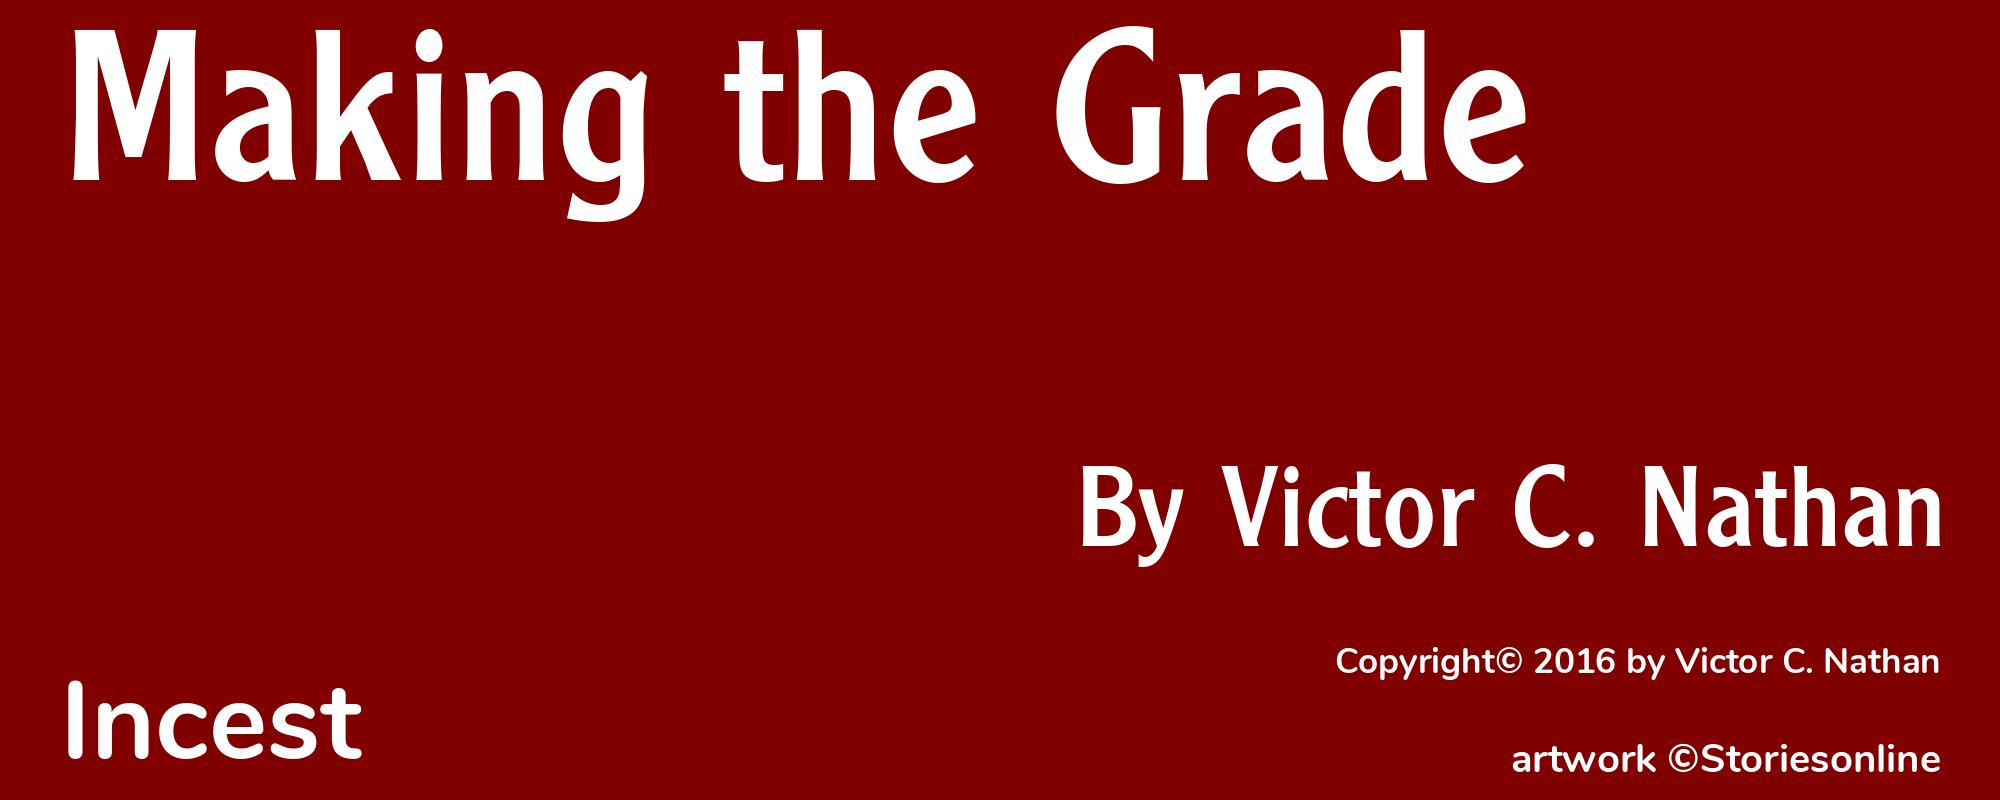 Making the Grade - Cover